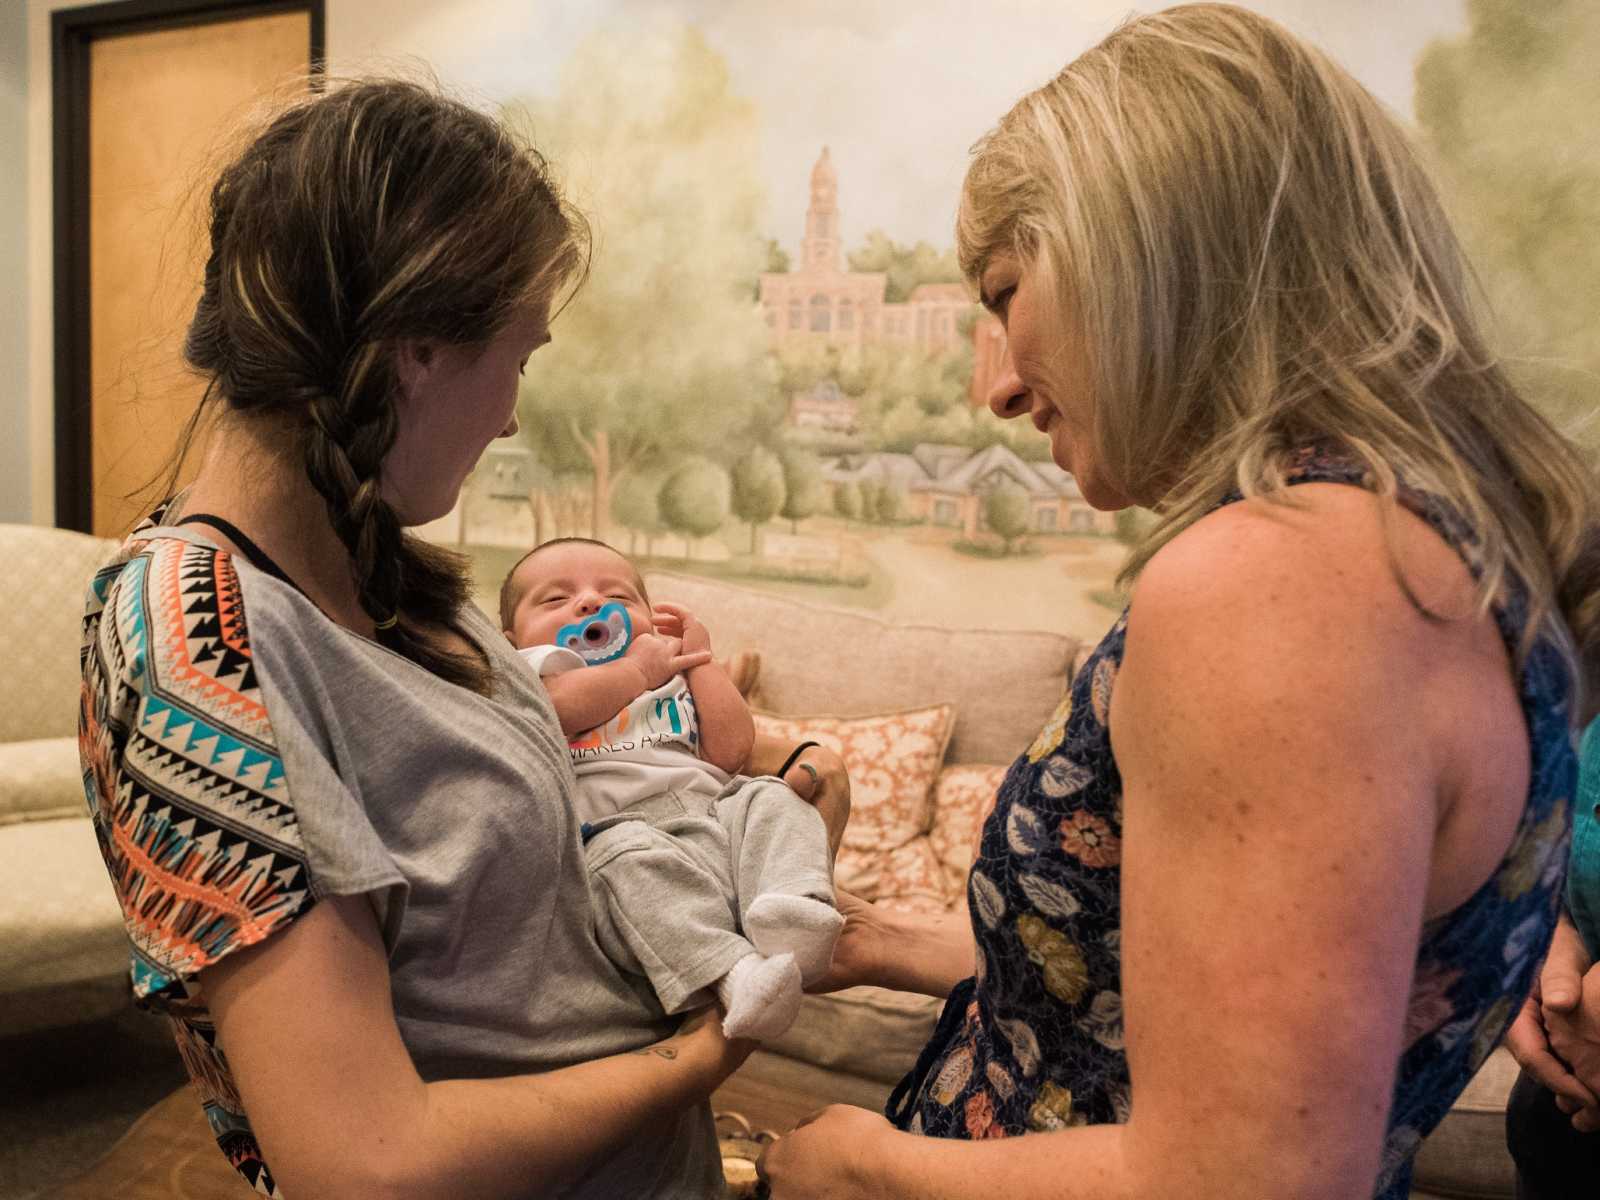 birth mother holds looks down at son in her arms next to adoptive mother